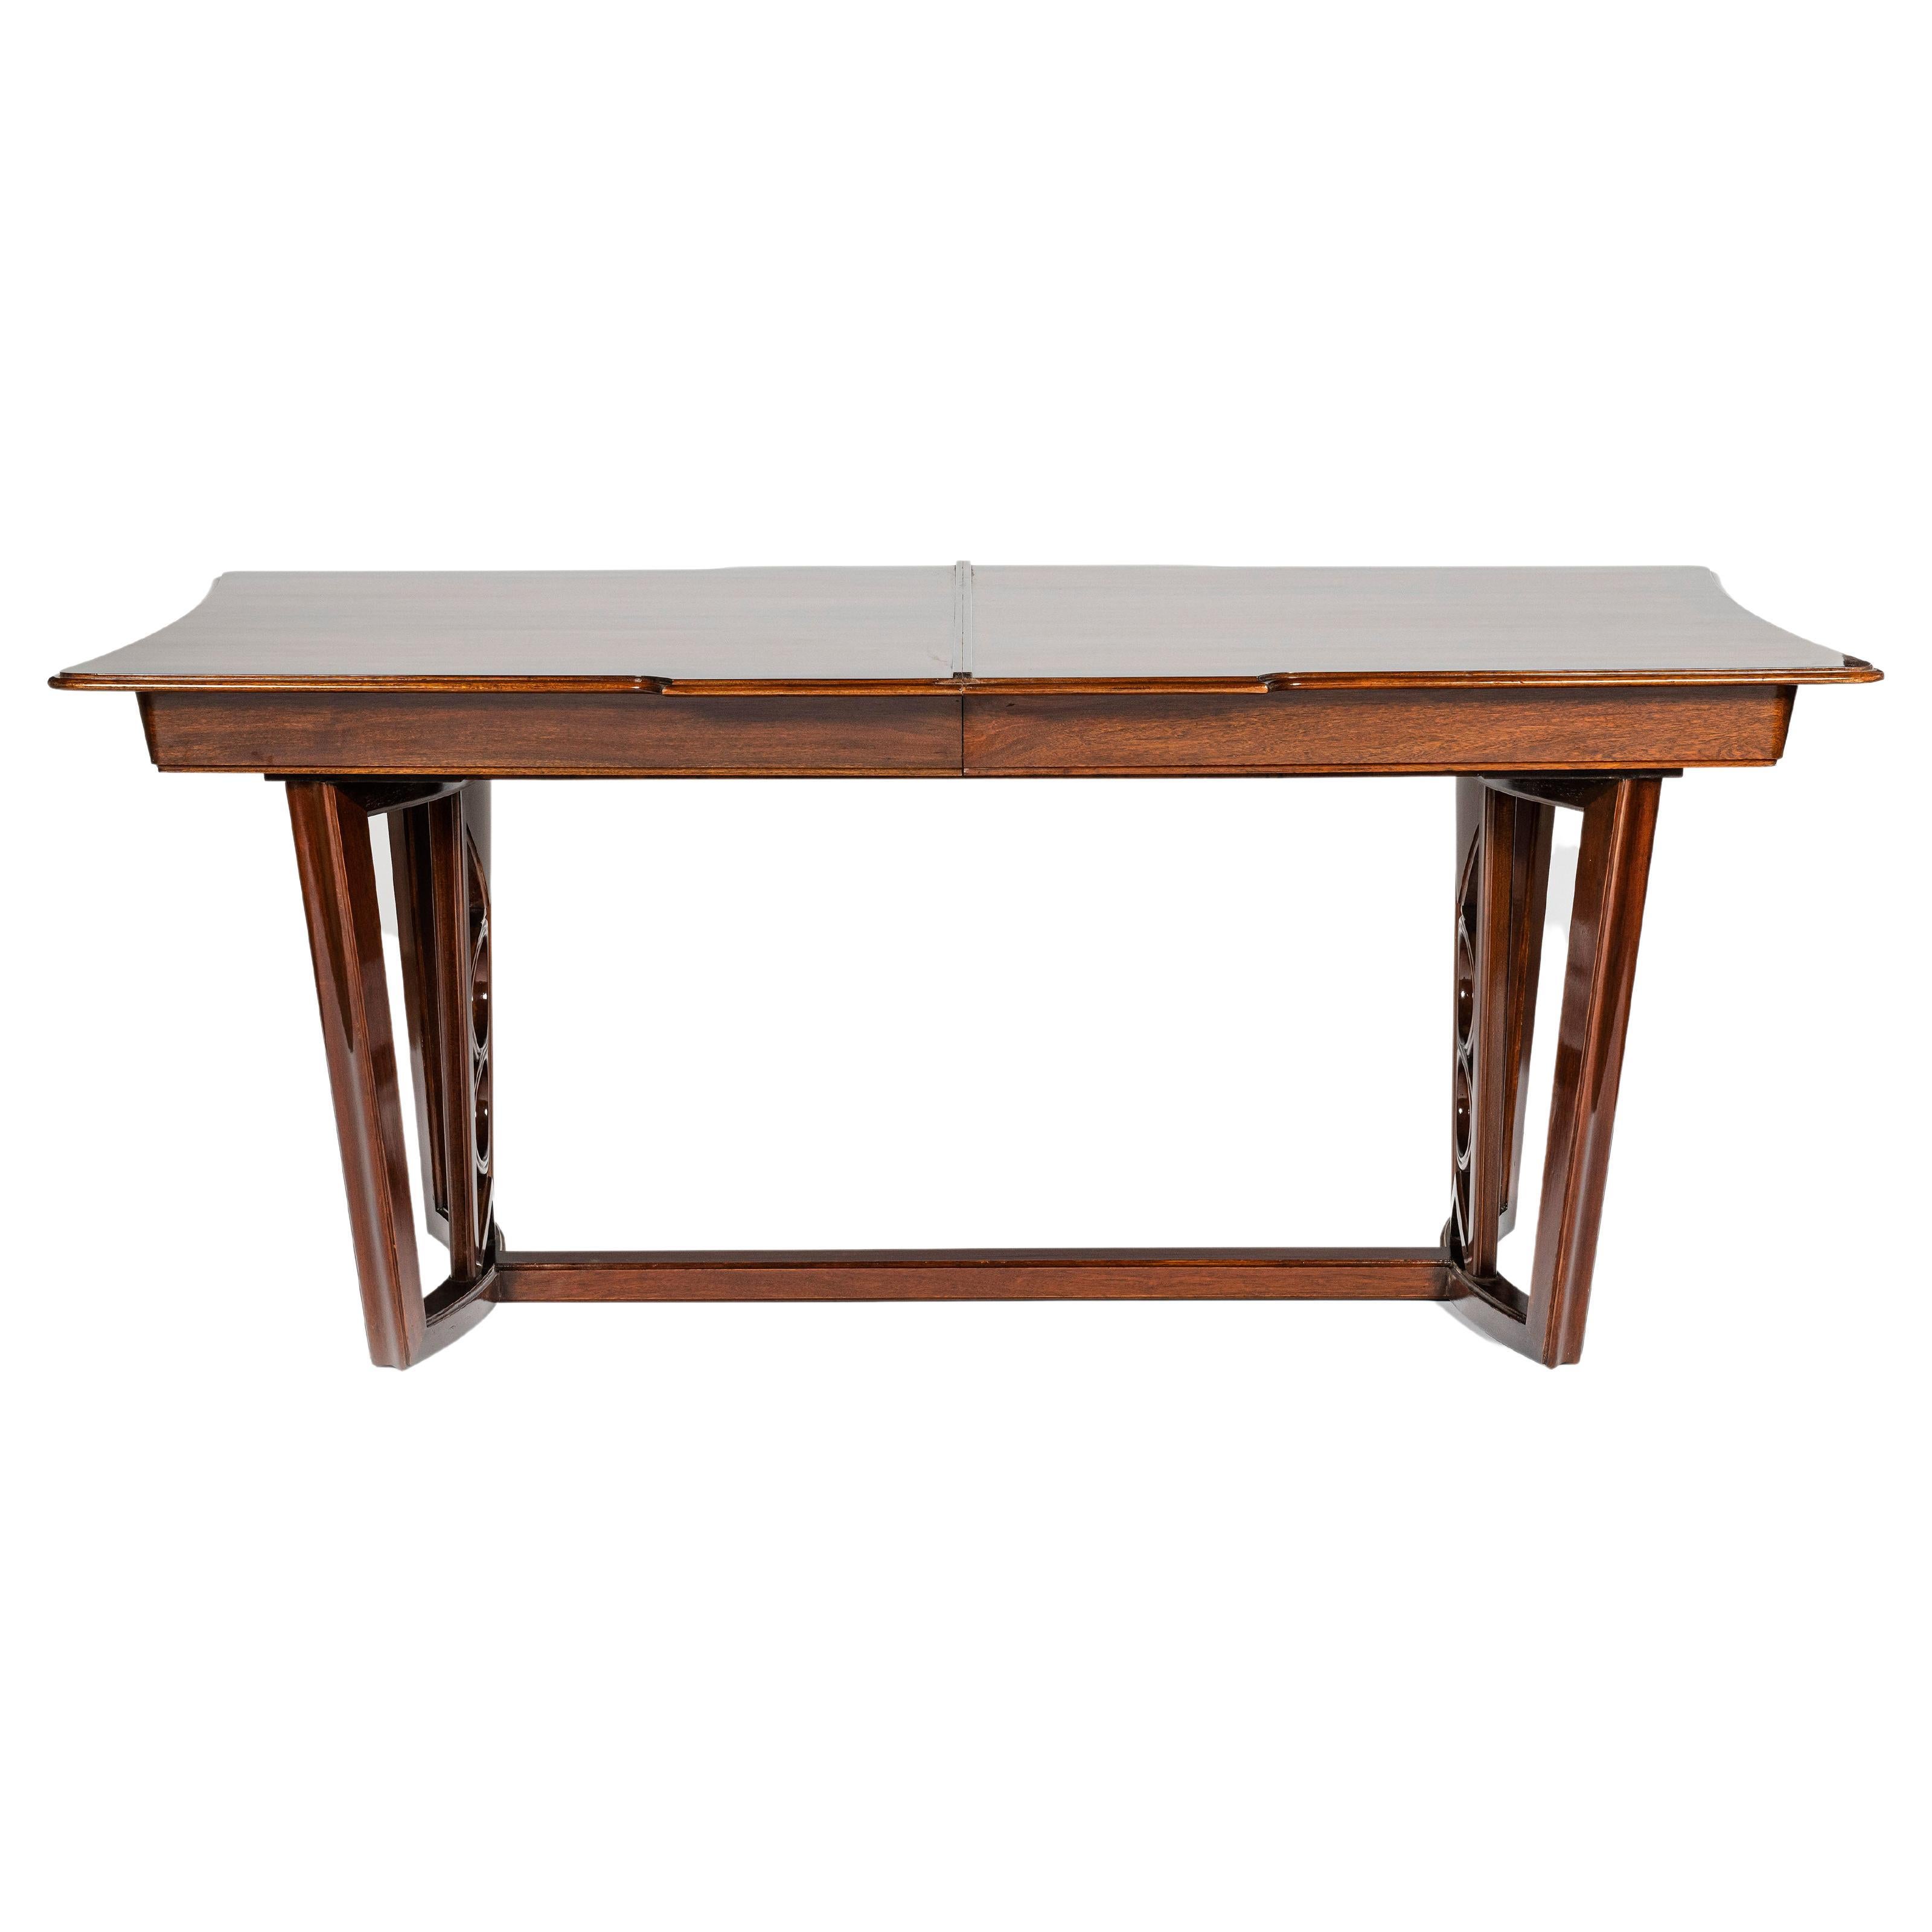 Wood dining room table with two extensions by Englander & Bonta, Argentina, Buenos Aires, circa 1950.

Table dimensions with both extensions: 77 cm height, 280 cm width, 100 cm depth.
Table dimensions without extensions: 77 cm height, 180 cm